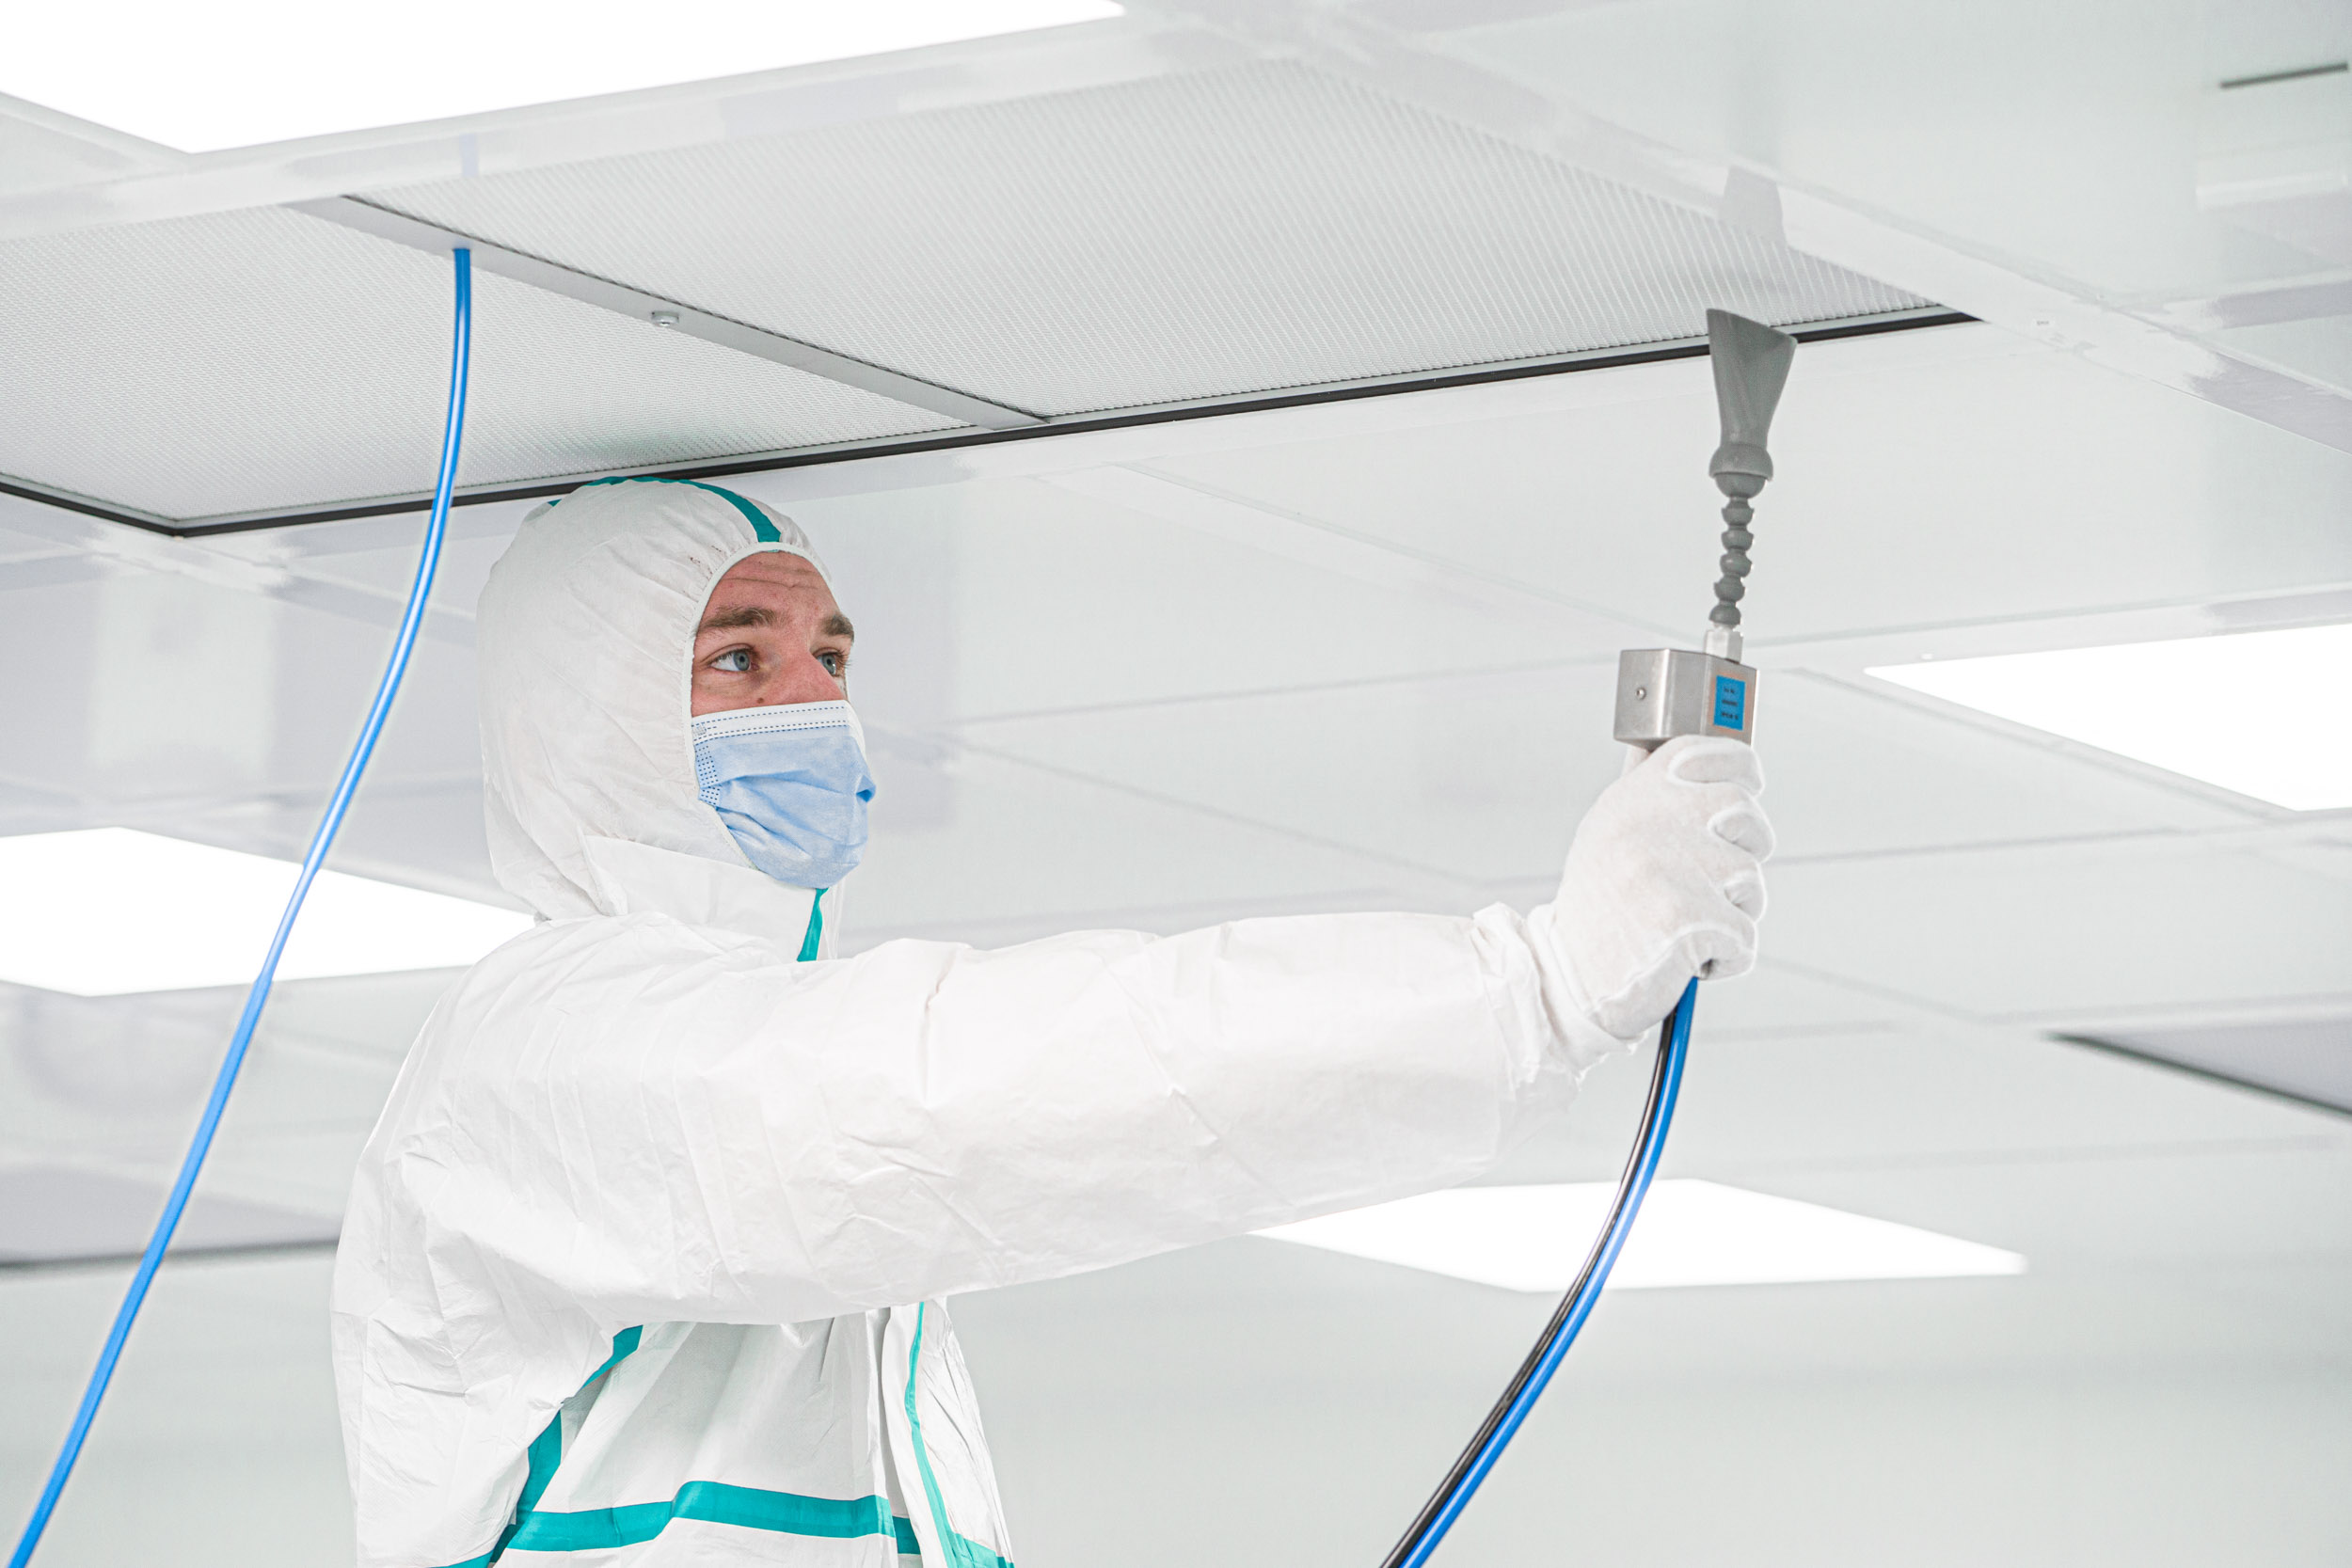 CARE OF AIR – a company focusing on cleanroom validation and qualification, accredited cleanroom measurements and design